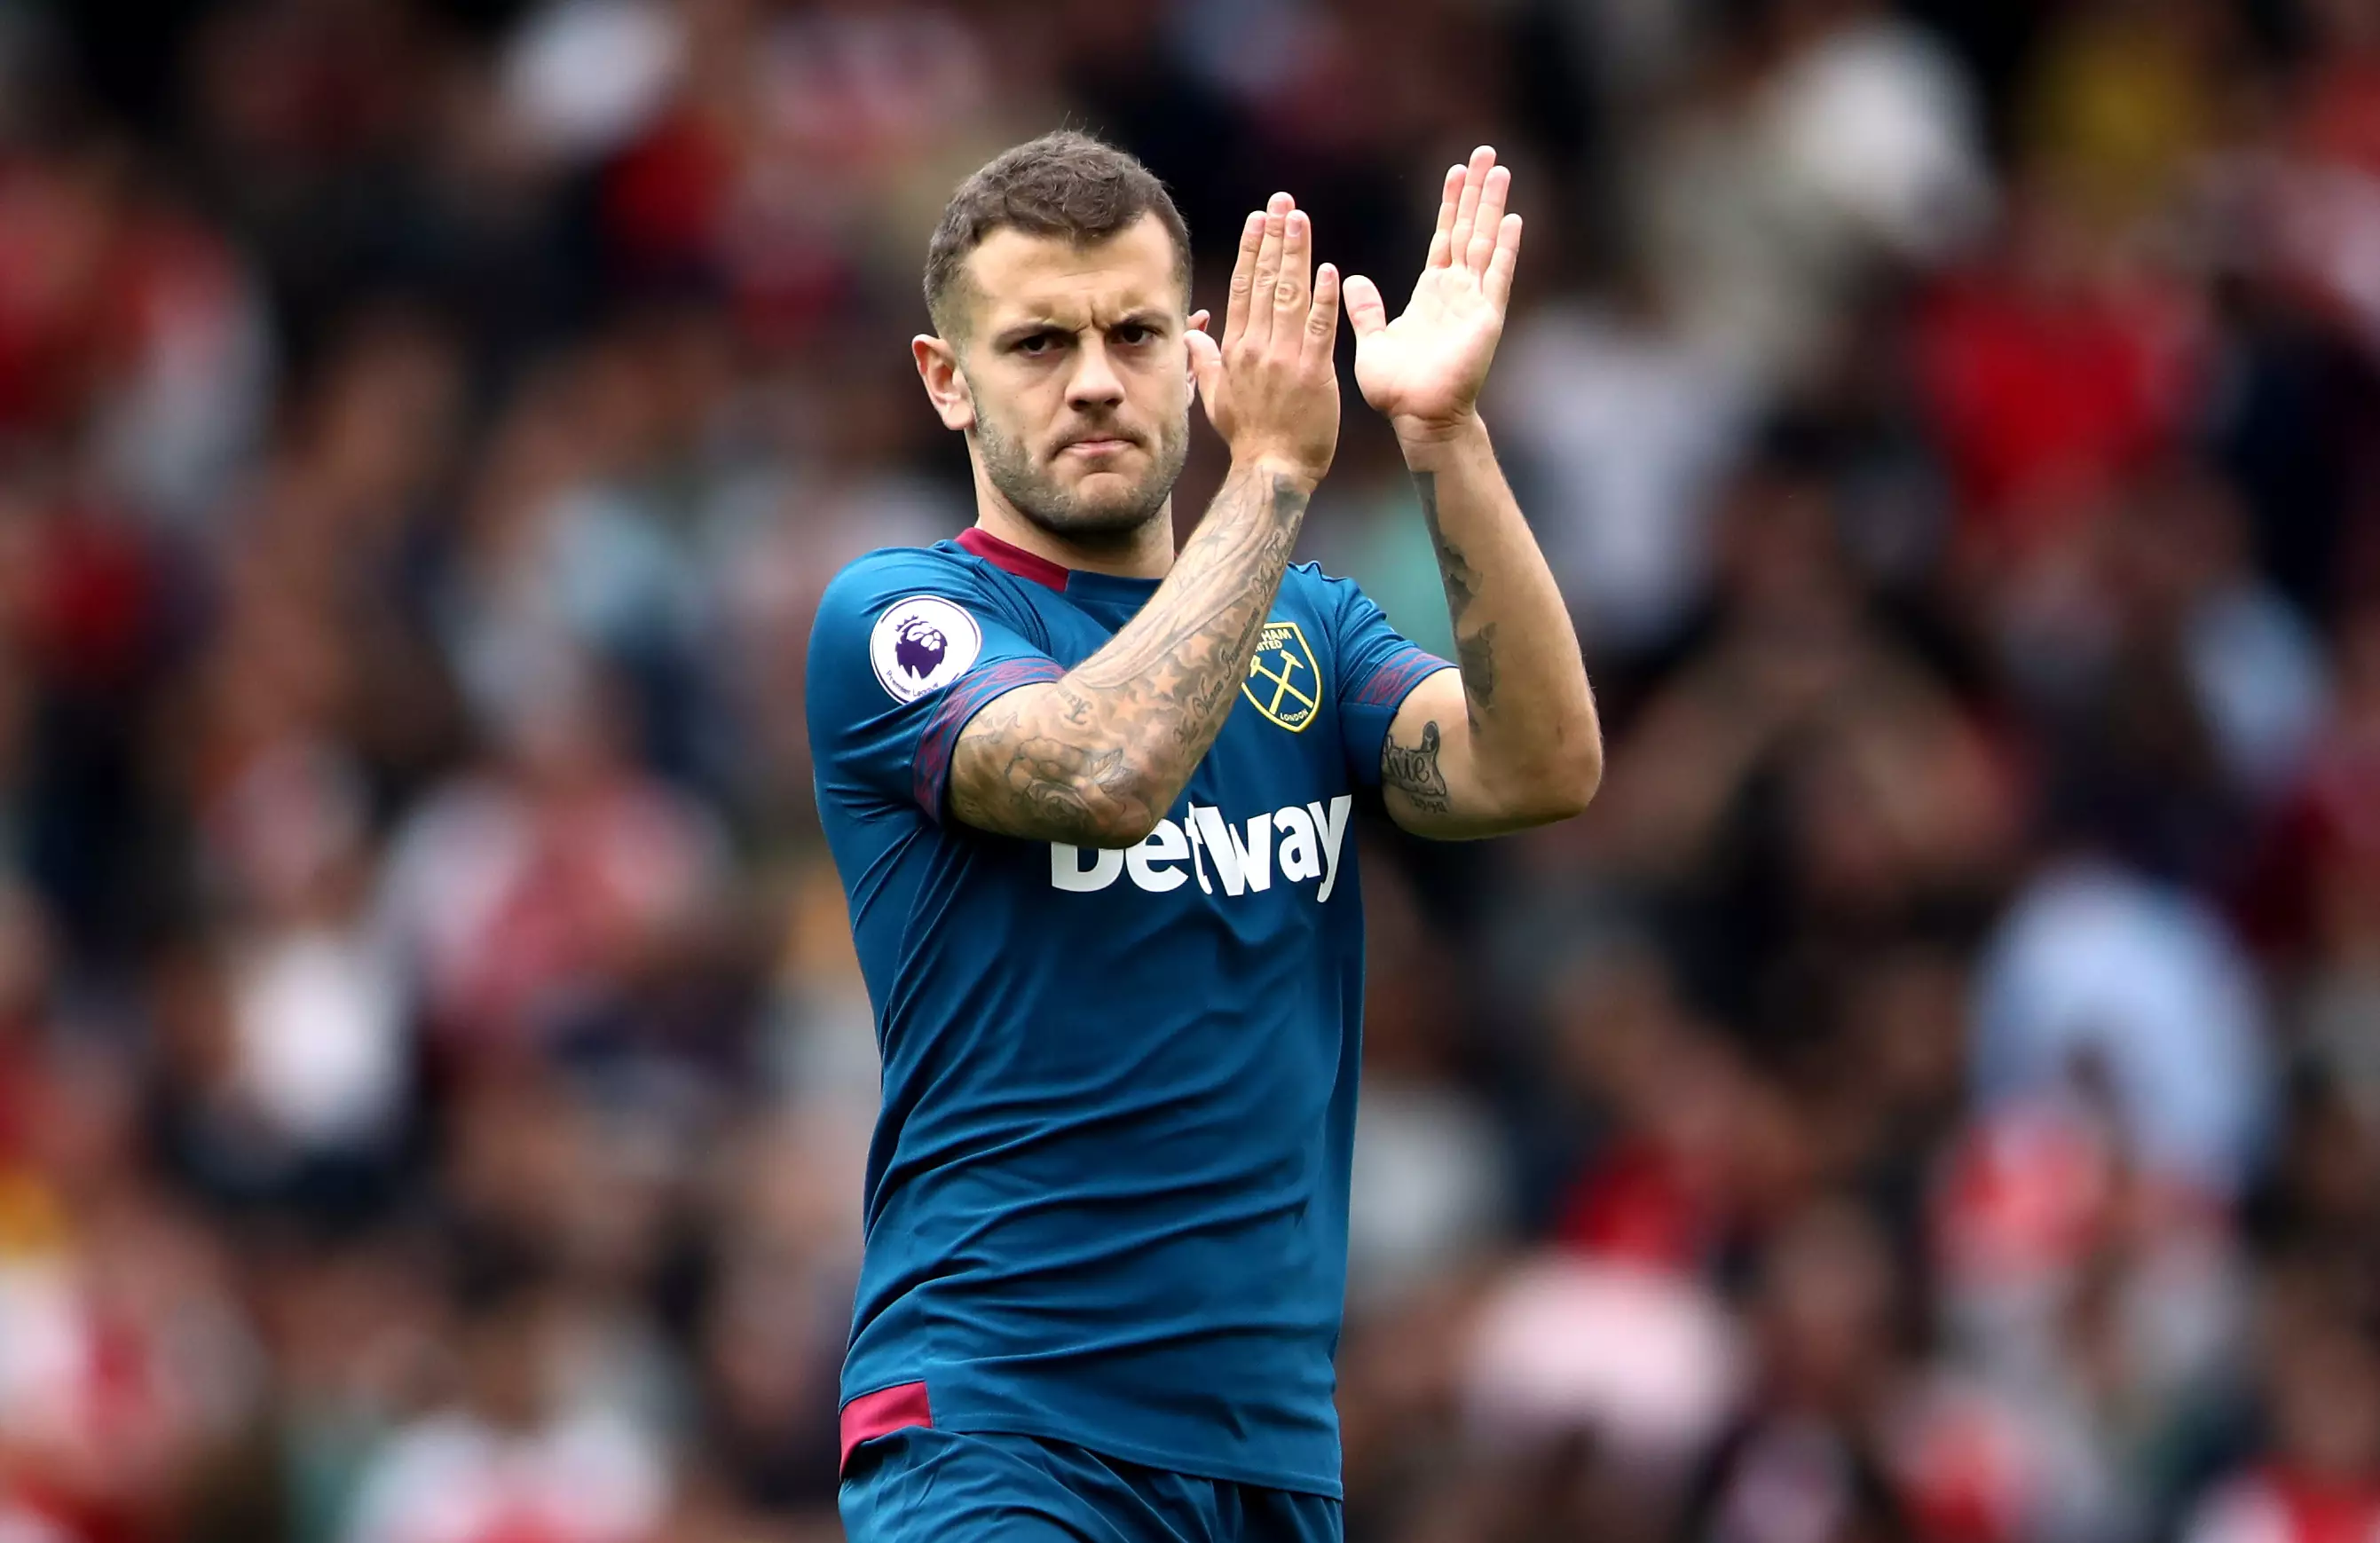 Wilshere's start at West Ham has already stalled. Image: PA Images